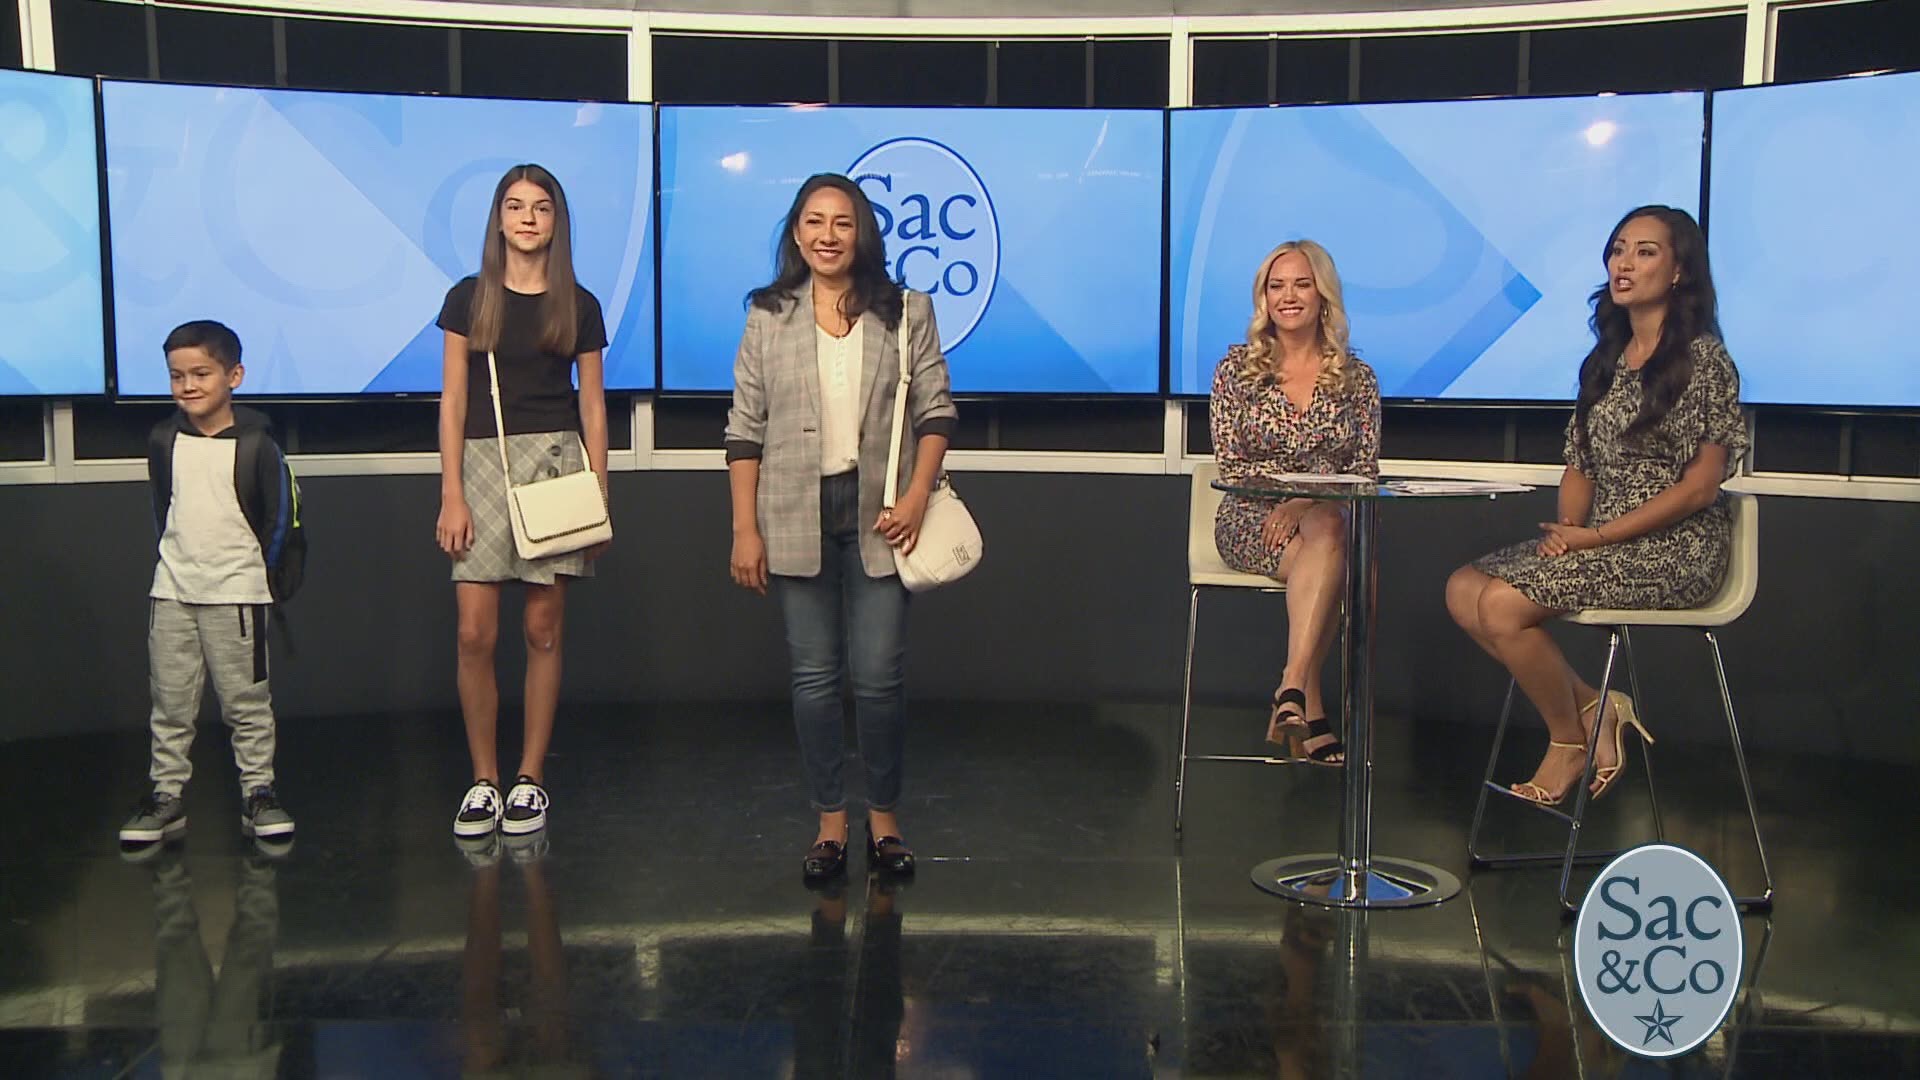 It’s almost that time again! Back to school shopping is right around the corner. Aubrey Aquino chatted with fashion expert, Keri Parker about how JCPenney could be your one stop shop! The following is a paid segment sponsored by JCPenney.